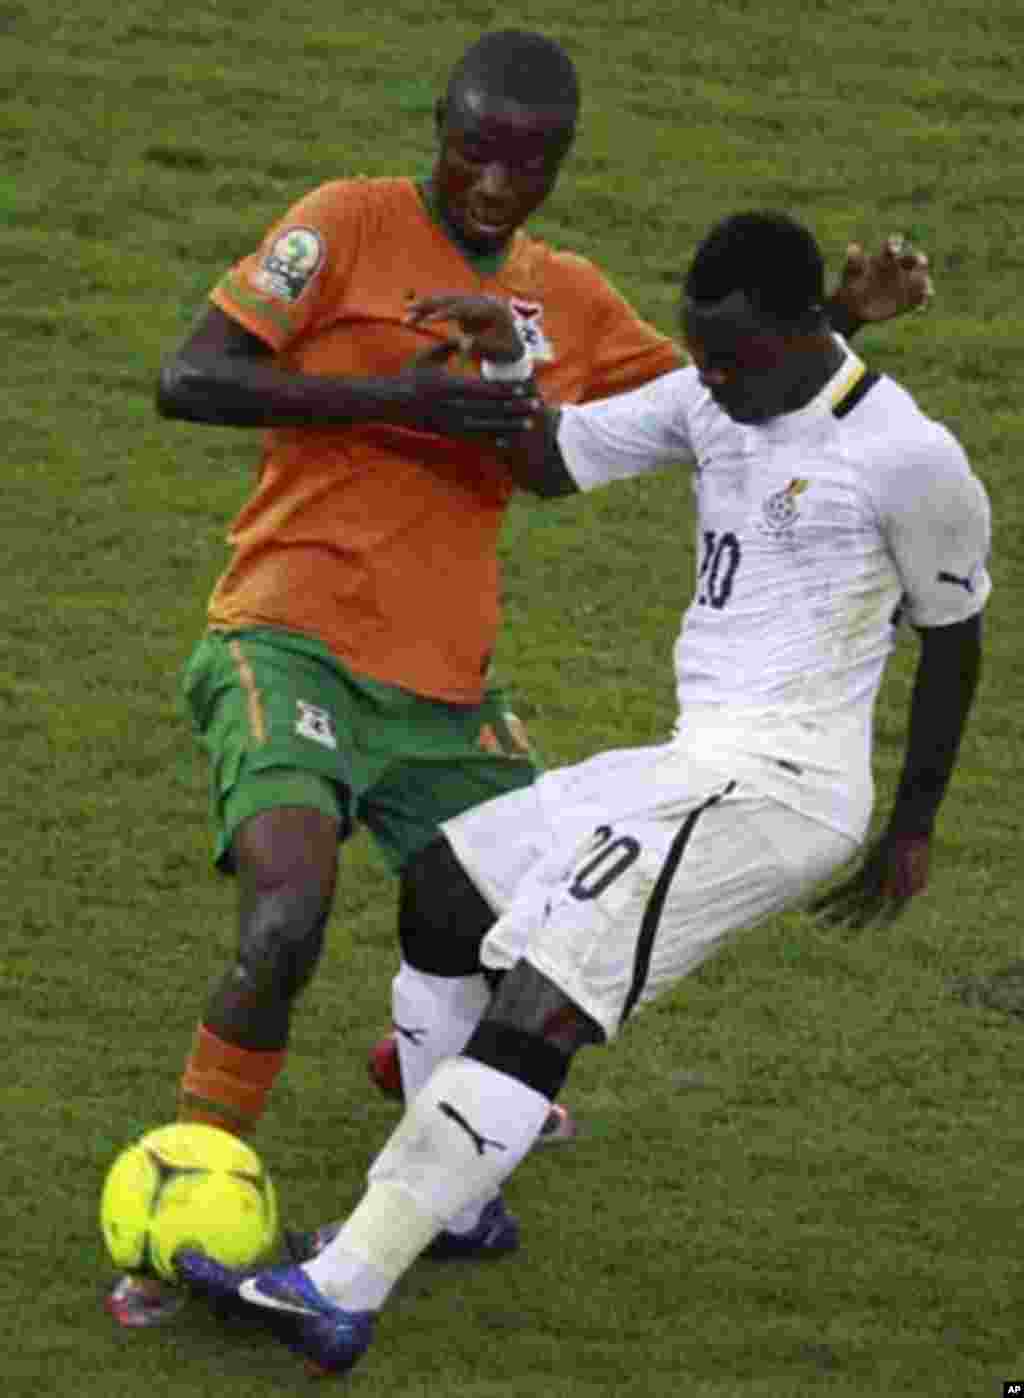 Kwadwo Asamoah of Ghana (R) fights for the ball with Nathan Sinkala of Zambia during their African Nations Cup semi-final soccer match at Estadio de Bata "Bata Stadium" in Bata February 8, 2012.